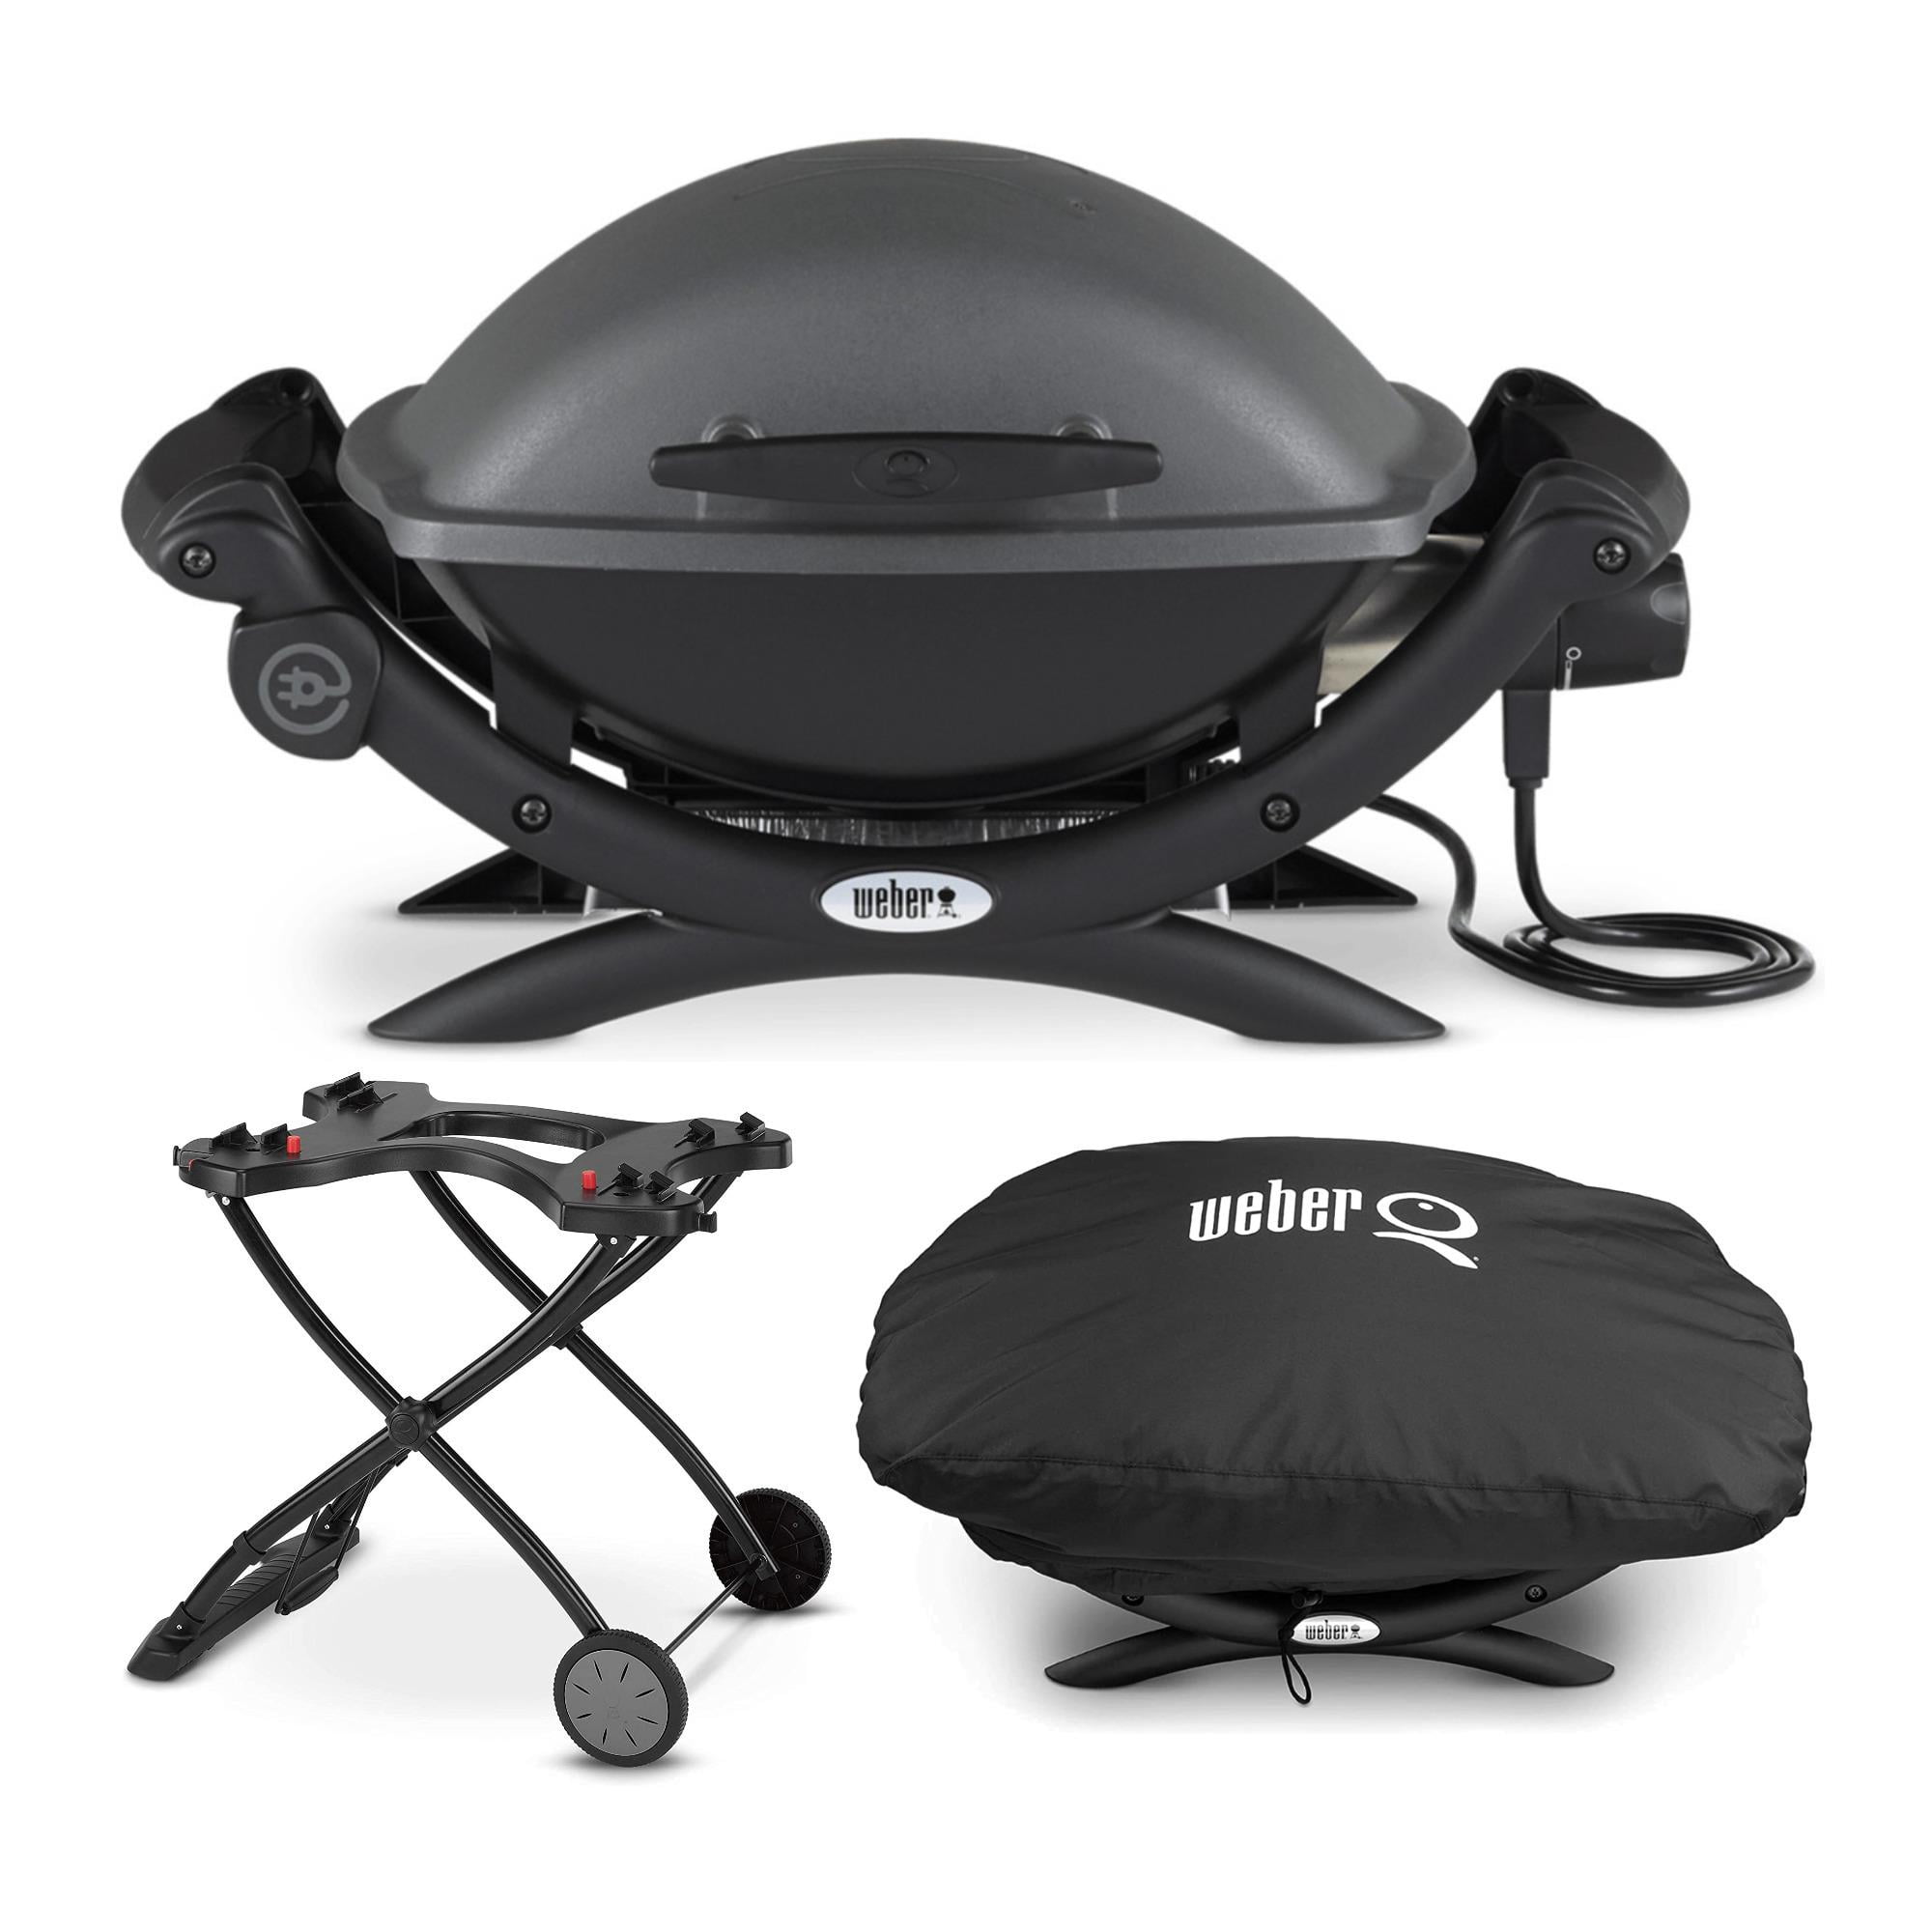 Weber Q 1400 (Black) with Portable Cart and Cover - Walmart.com